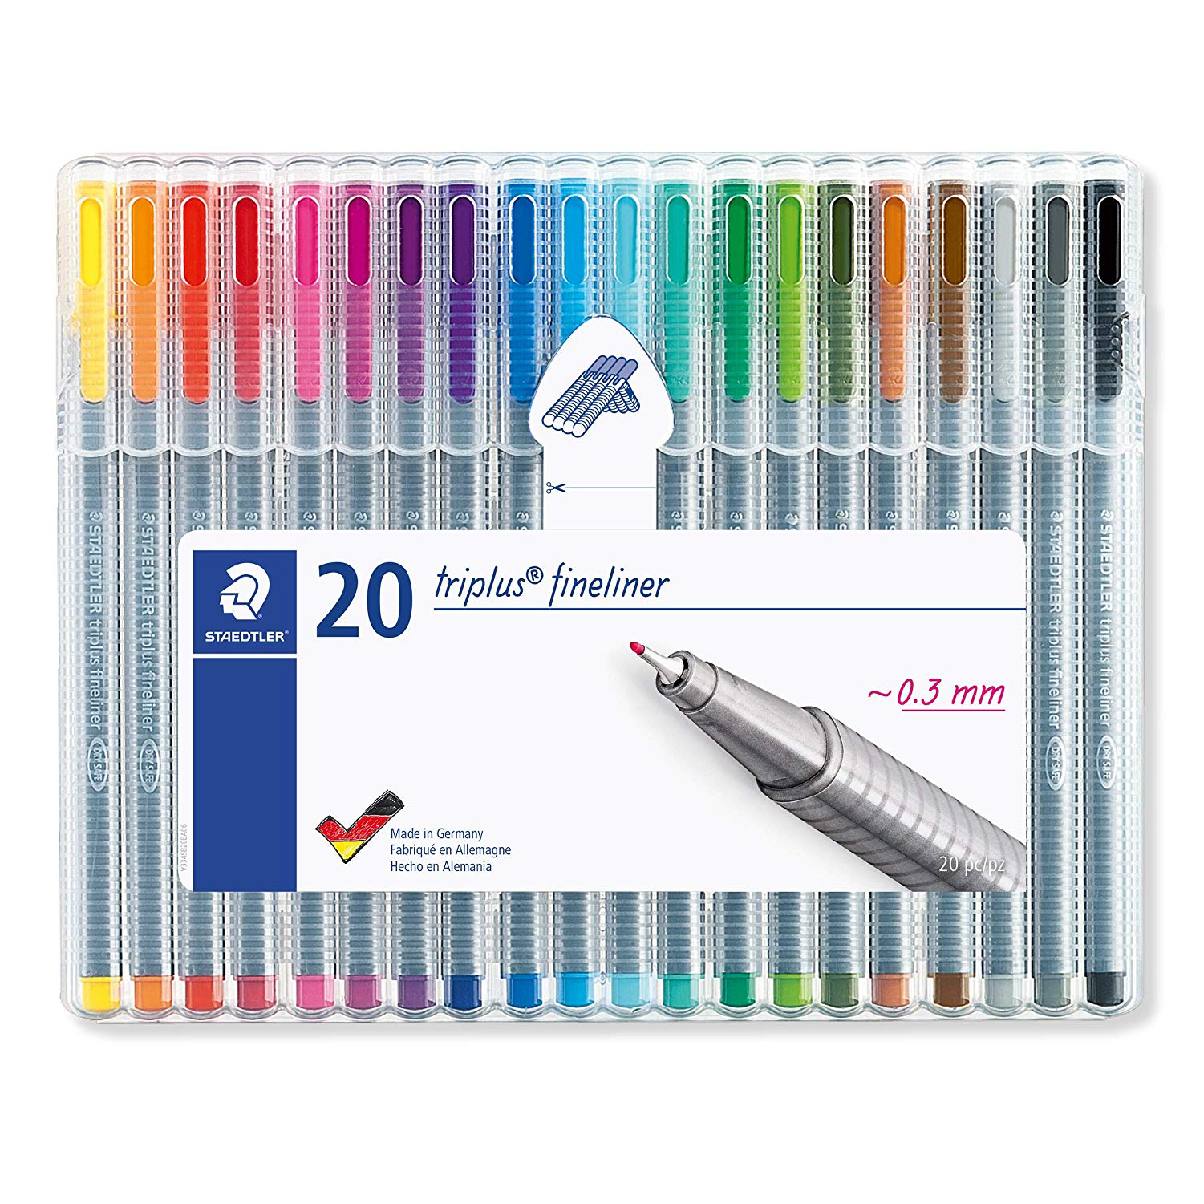 Dual Tip Brush Pens Double Sided Pigment Based(Non Acrylic) Brush Markers  36 Color Art Set with Zipper Case Flexible Brush and 0.4mm Fineliner 